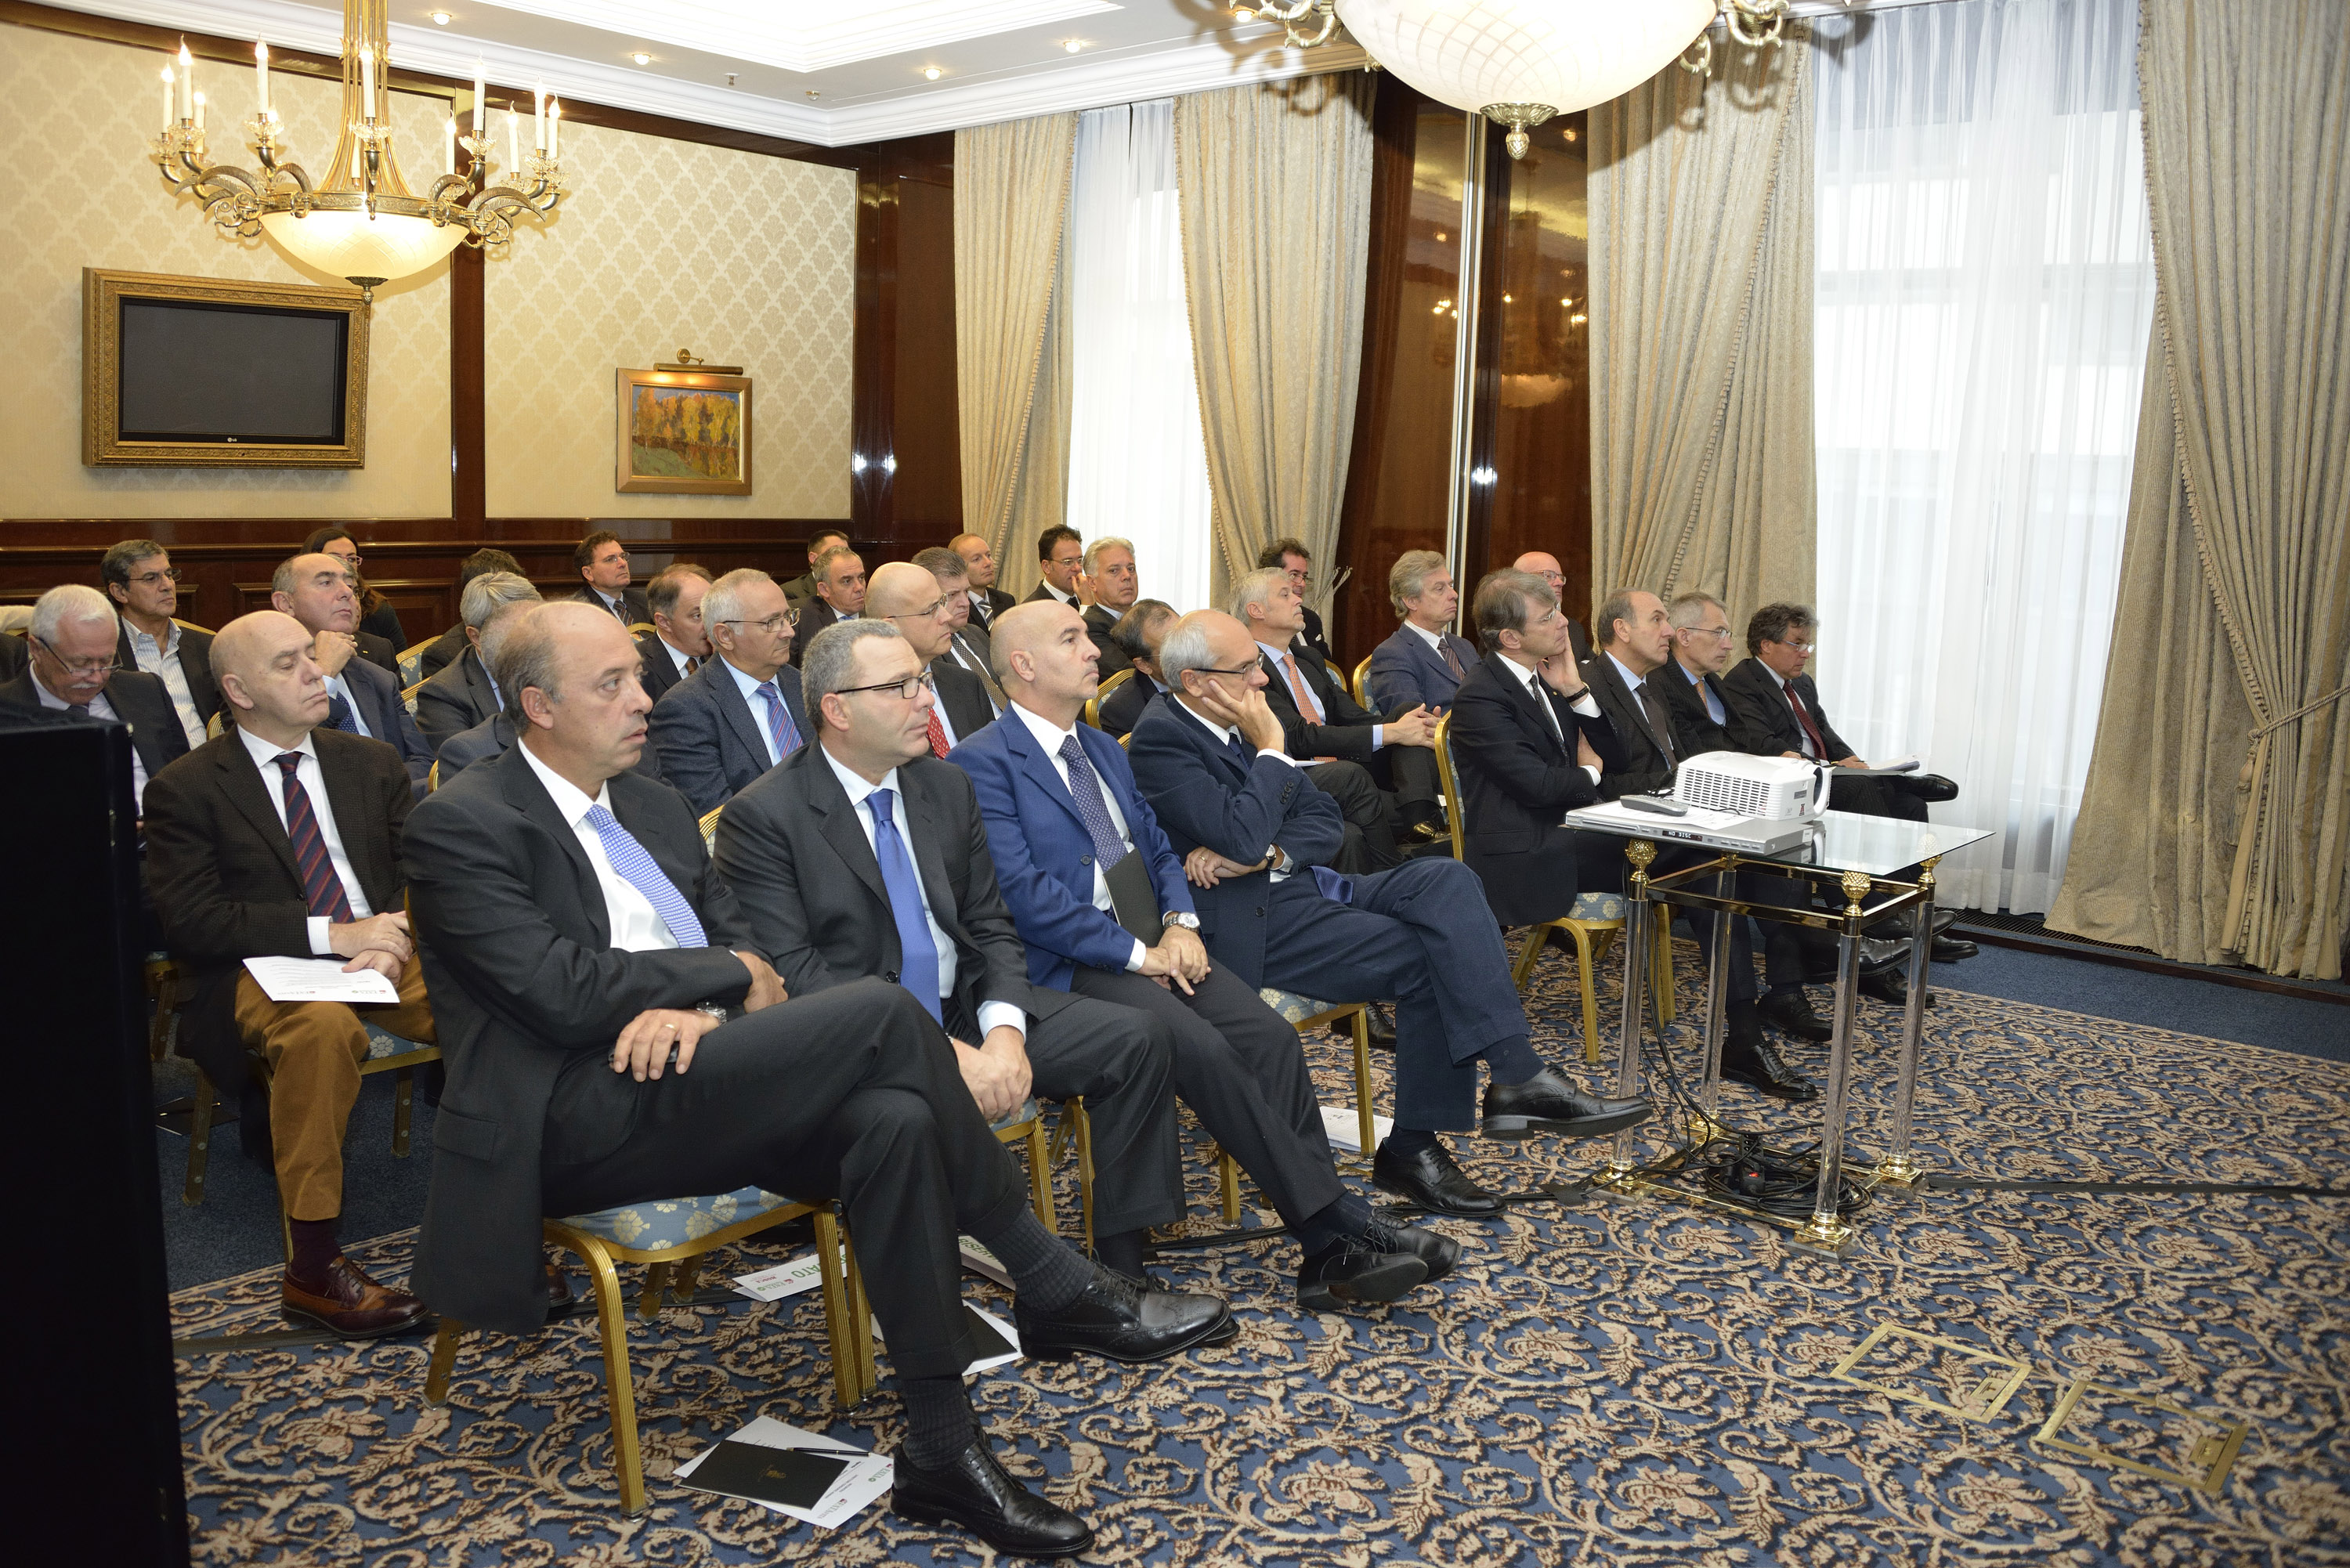 incentive-russia-mosca-meeting-events-in-out